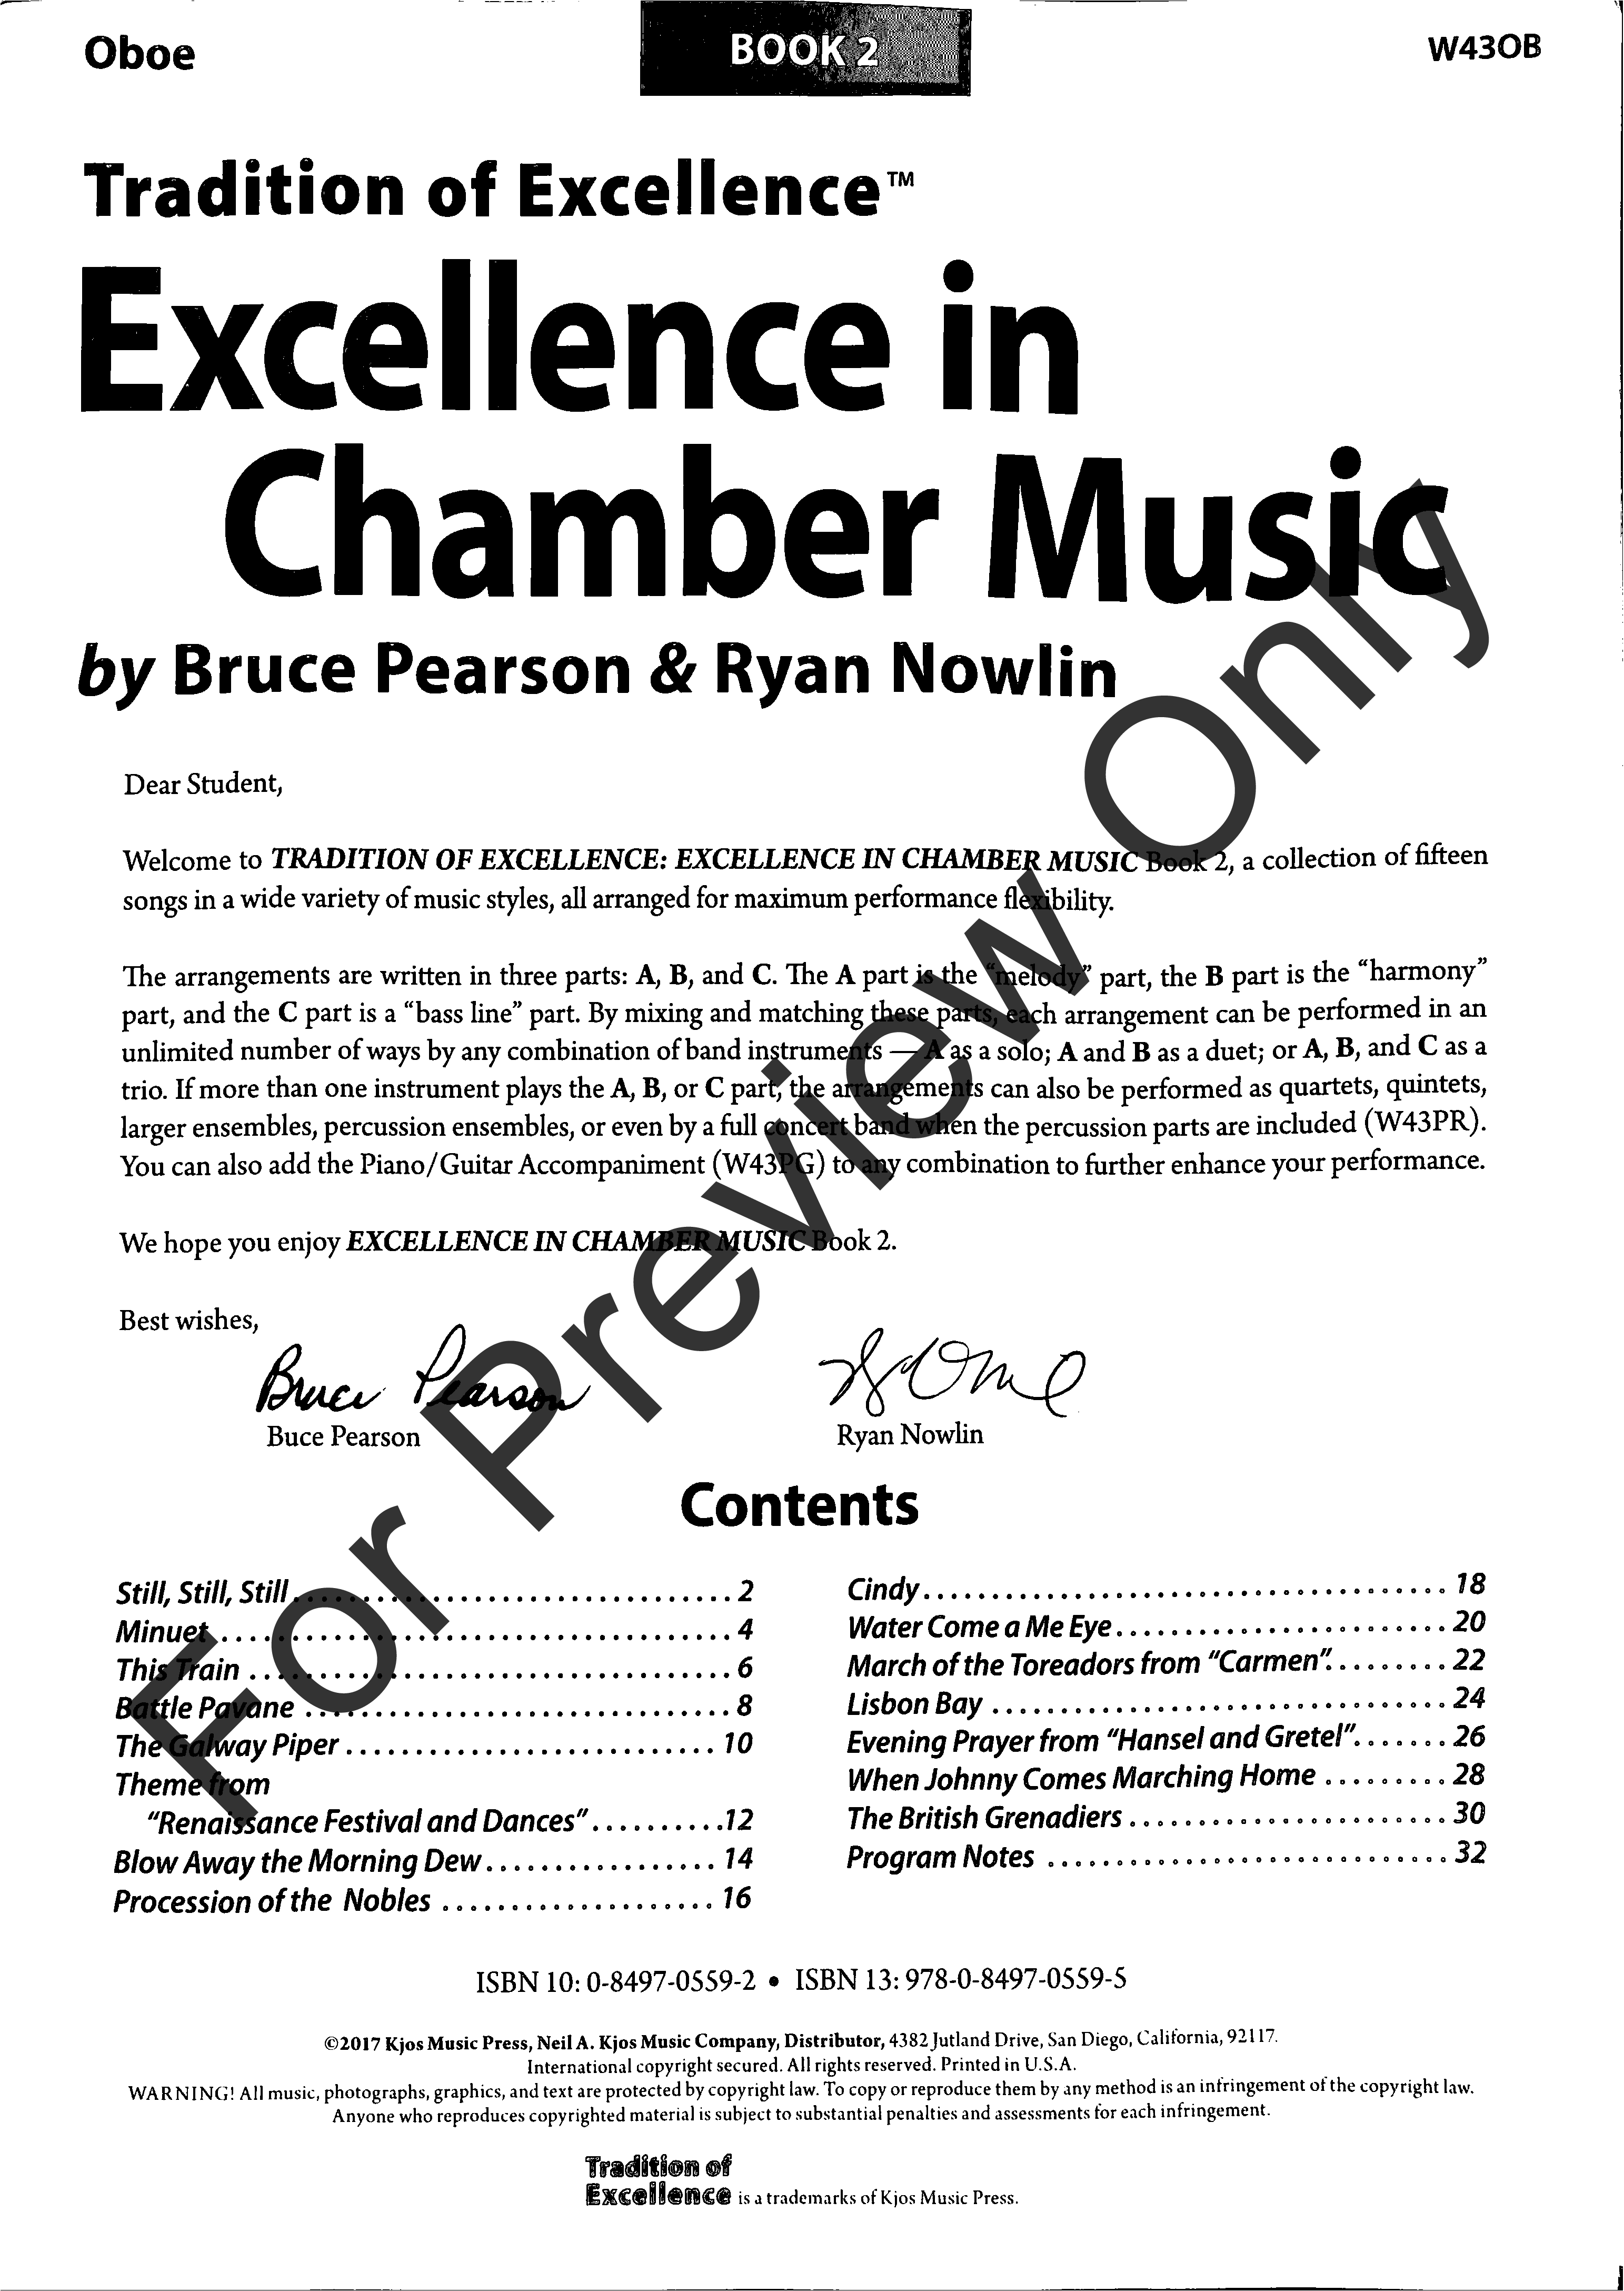 Excellence in Chamber Music #2 Oboe Book